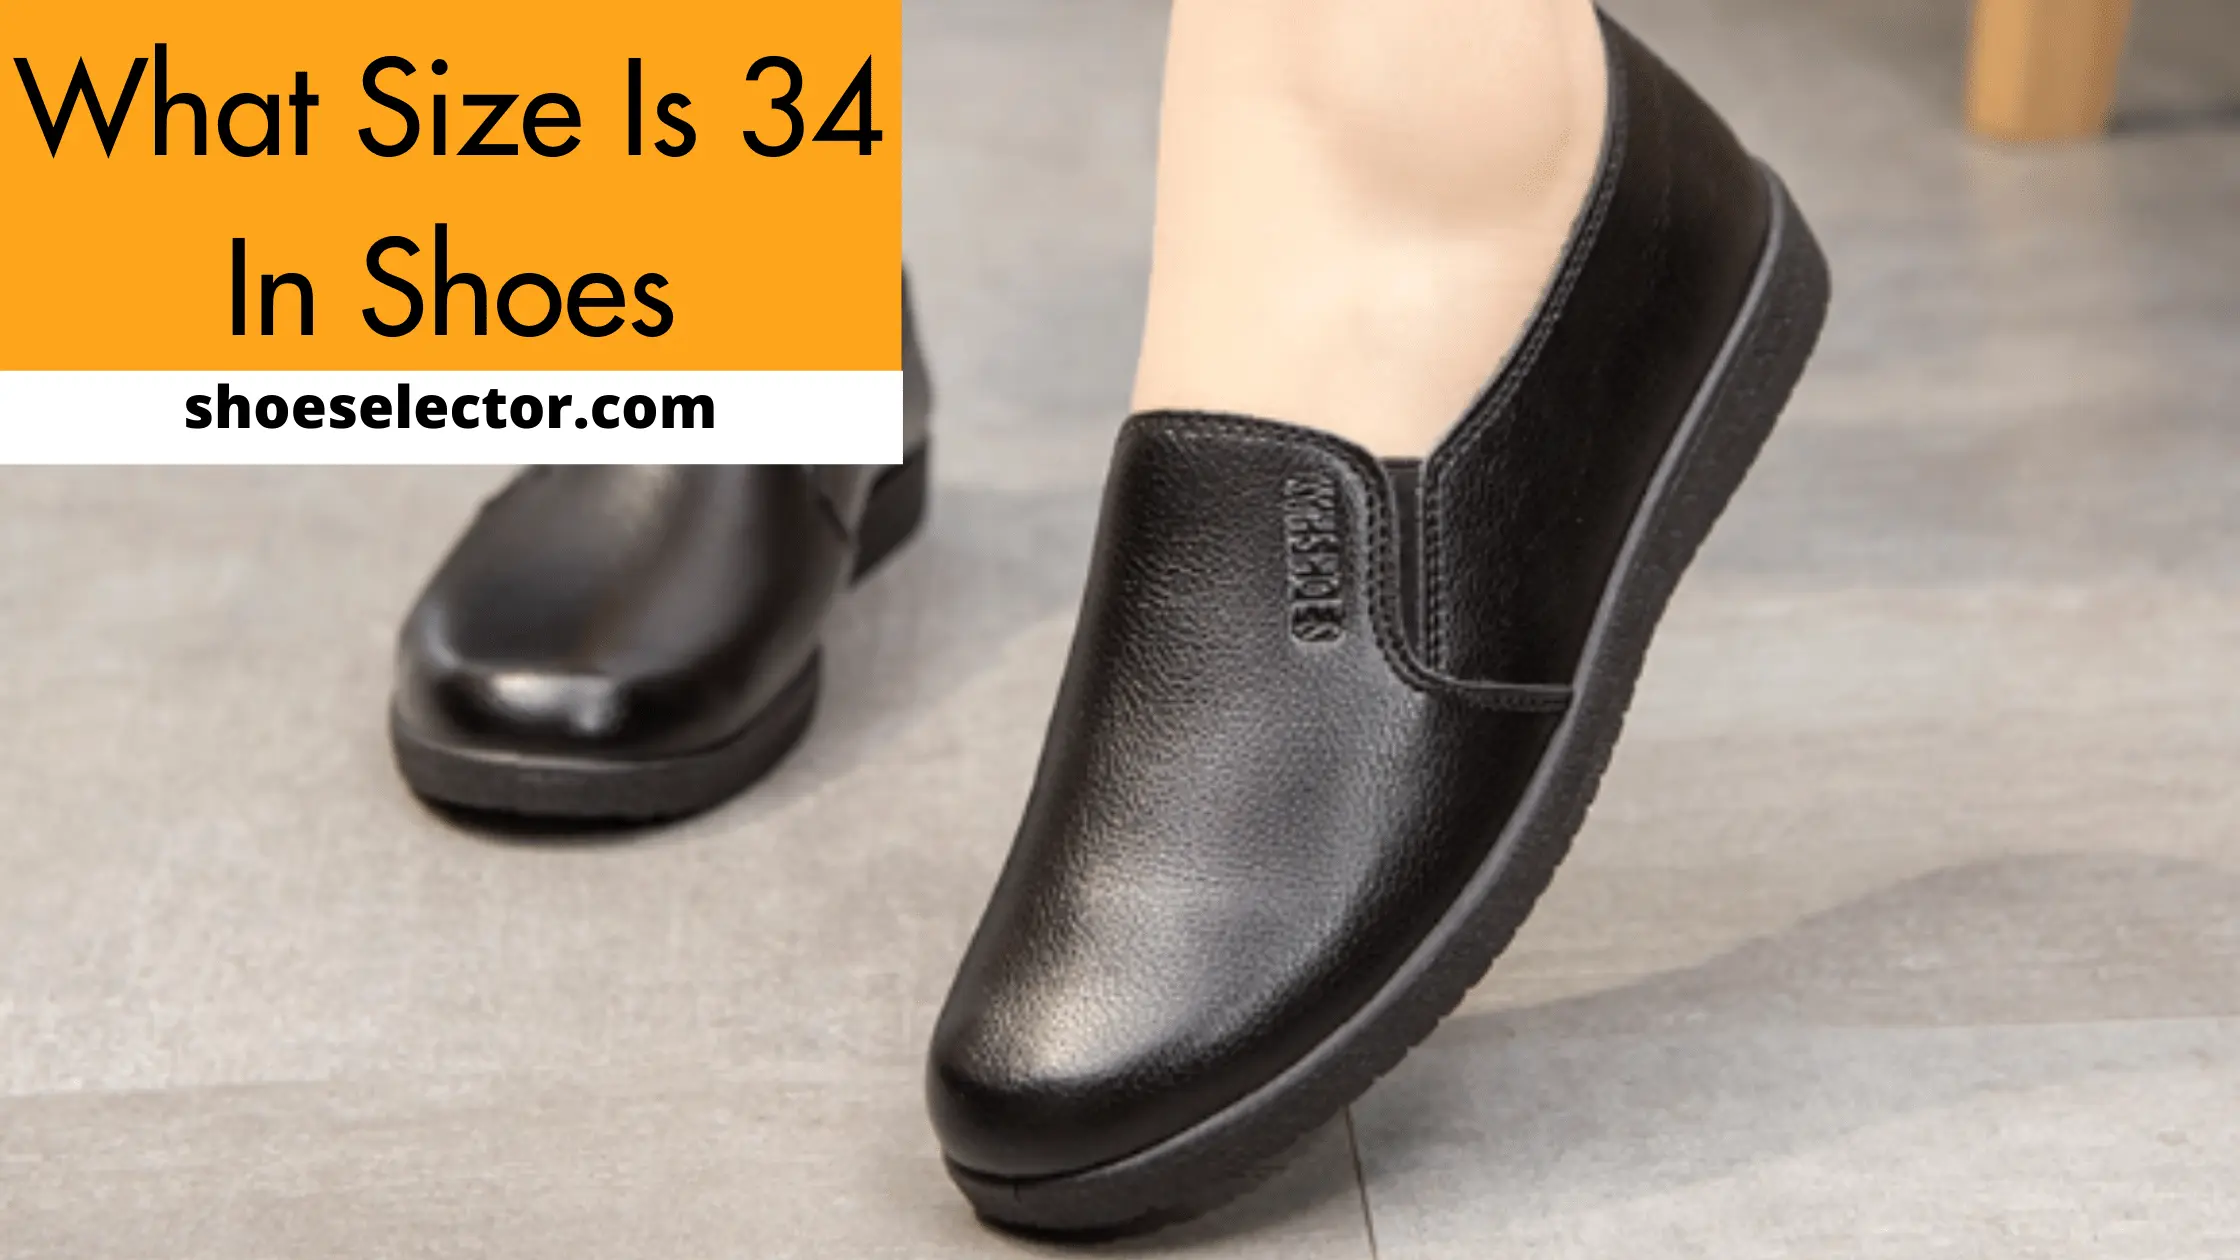 What Size Is 34 In Shoes? Pro & Simple Guide